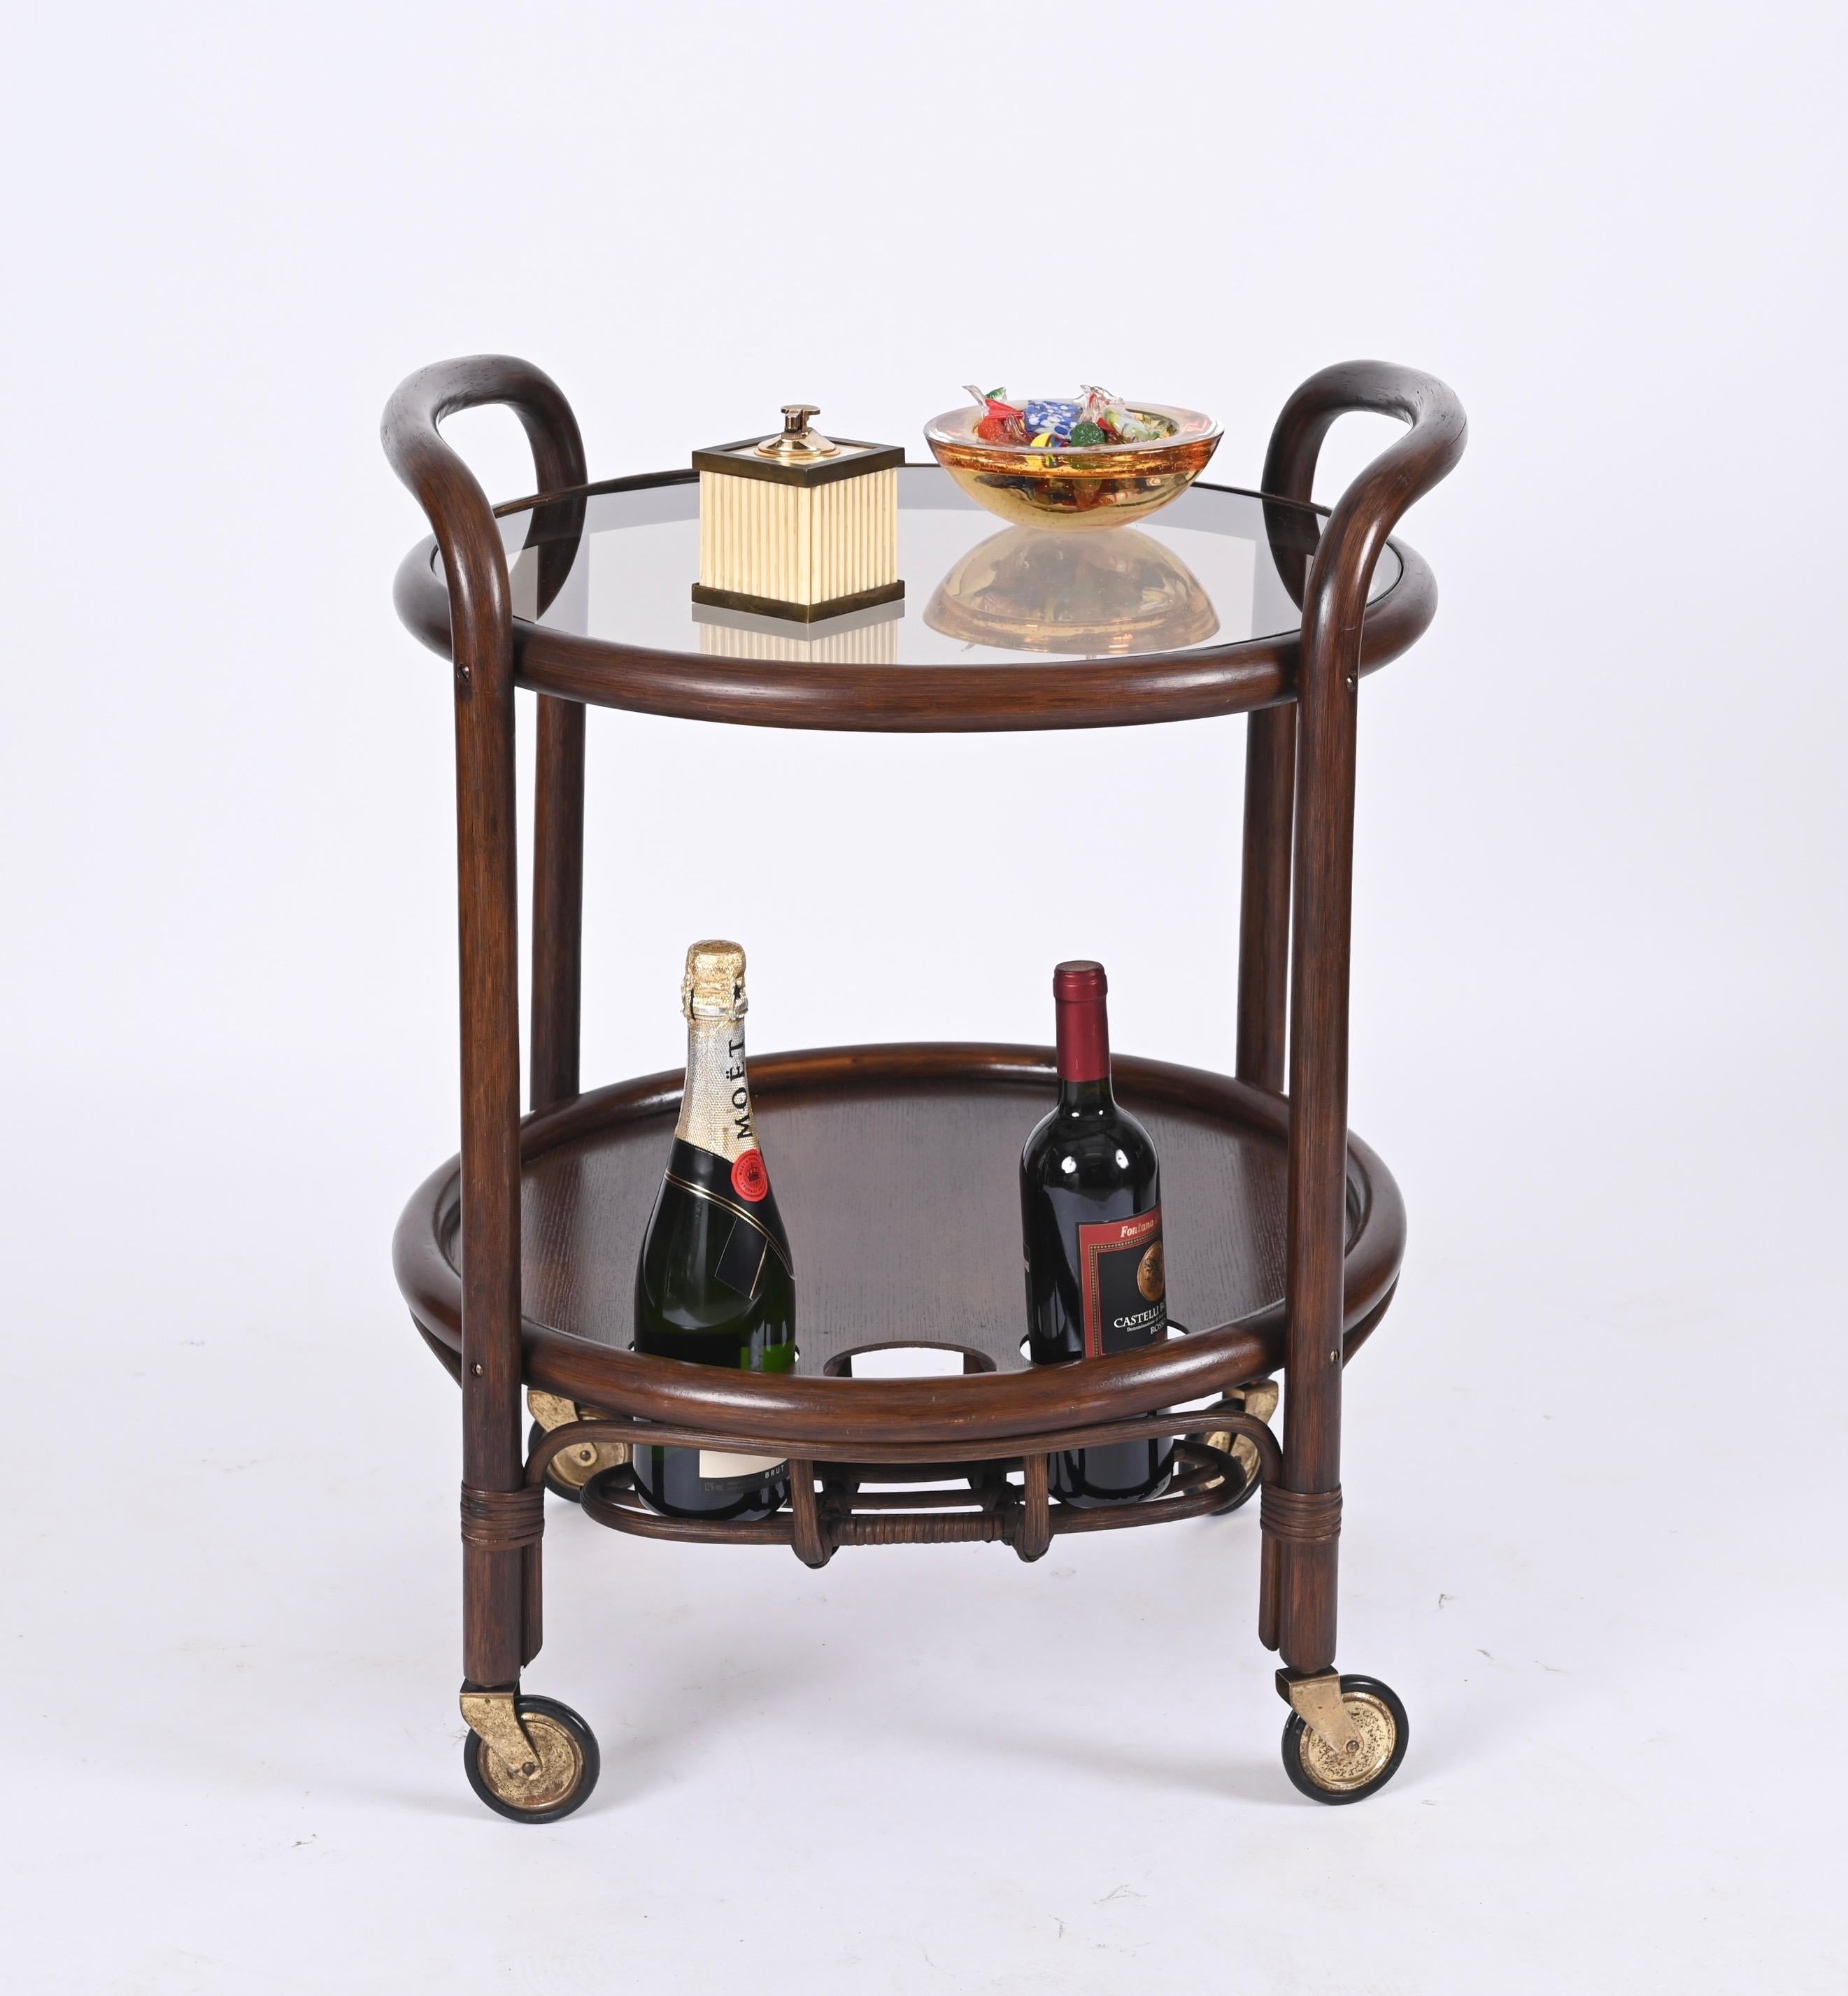 Midcentury Bar Serving Cart in Bamboo, Rattan and Smoked Glass, Italy, 1970s For Sale 5